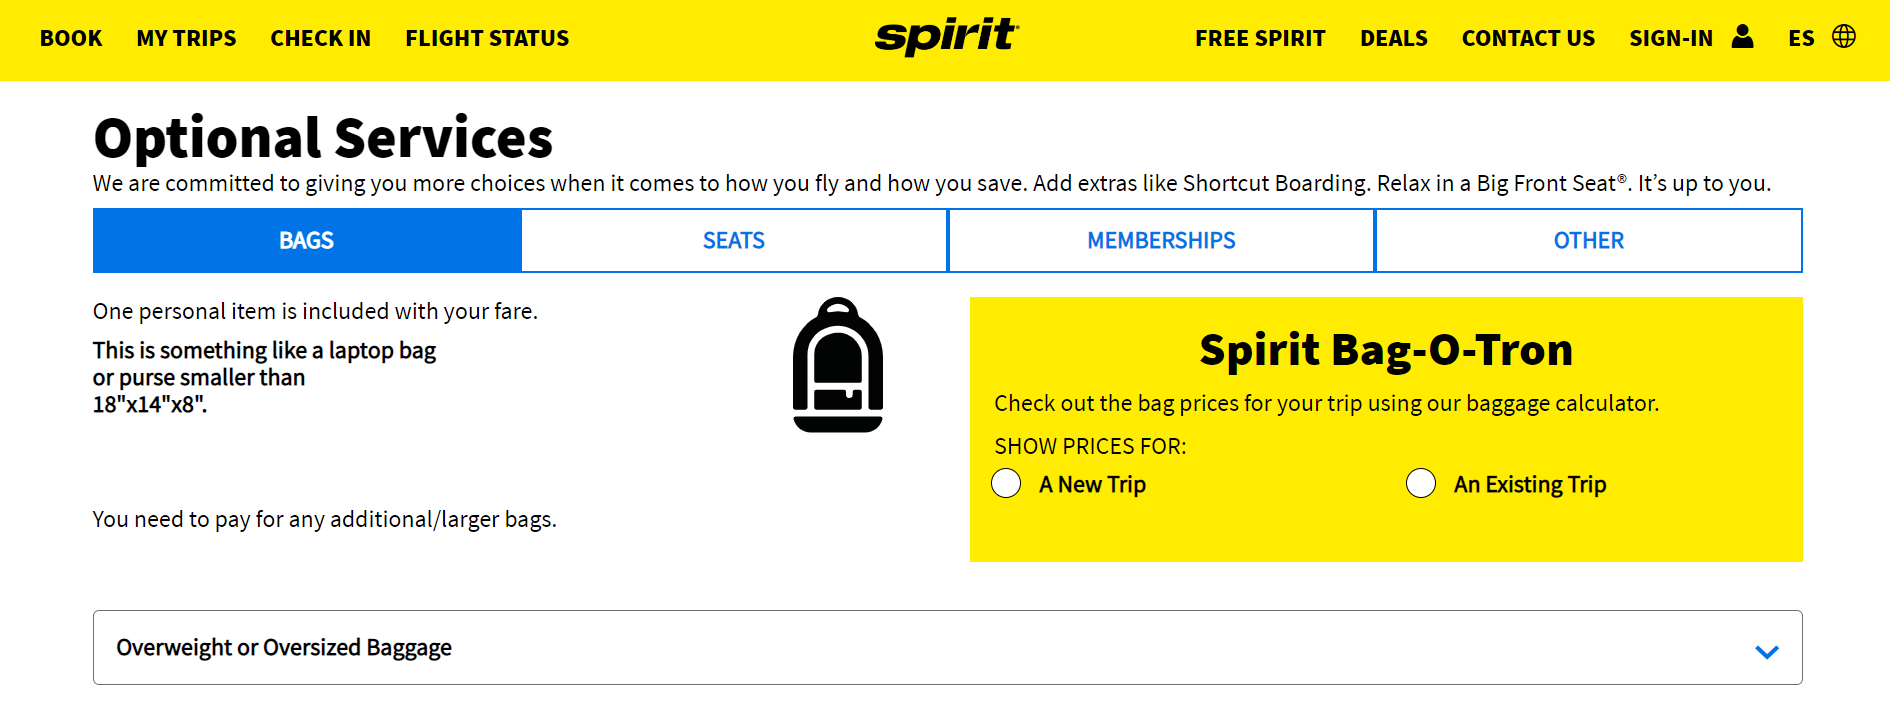 Spirit Airlines Baggage Policy, Fees & Allowance